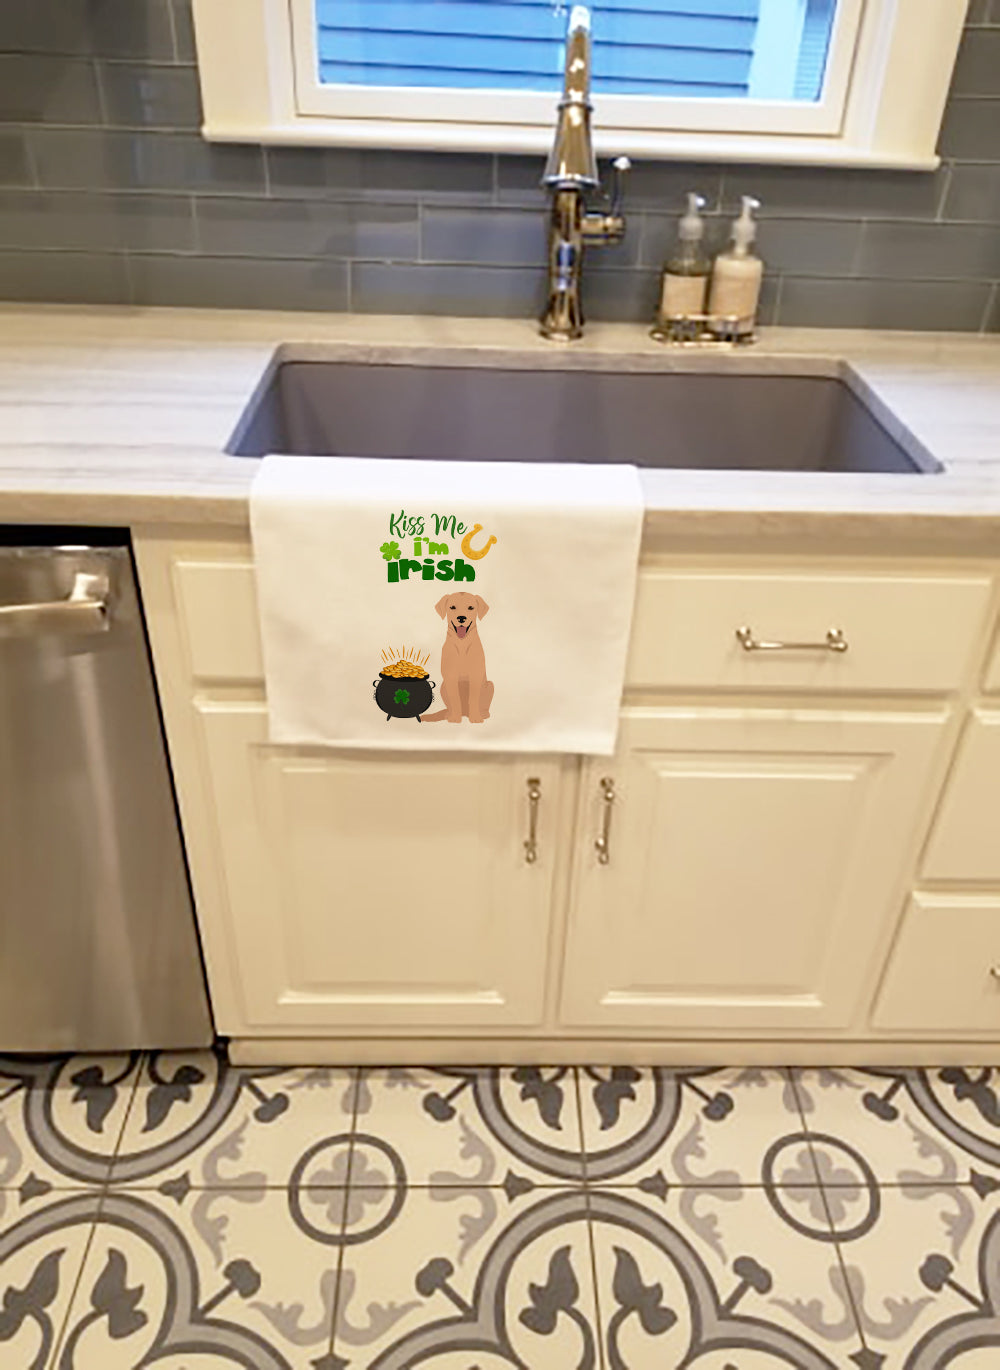 Buy this Yellow Labrador Retriever St. Patrick's Day White Kitchen Towel Set of 2 Dish Towels